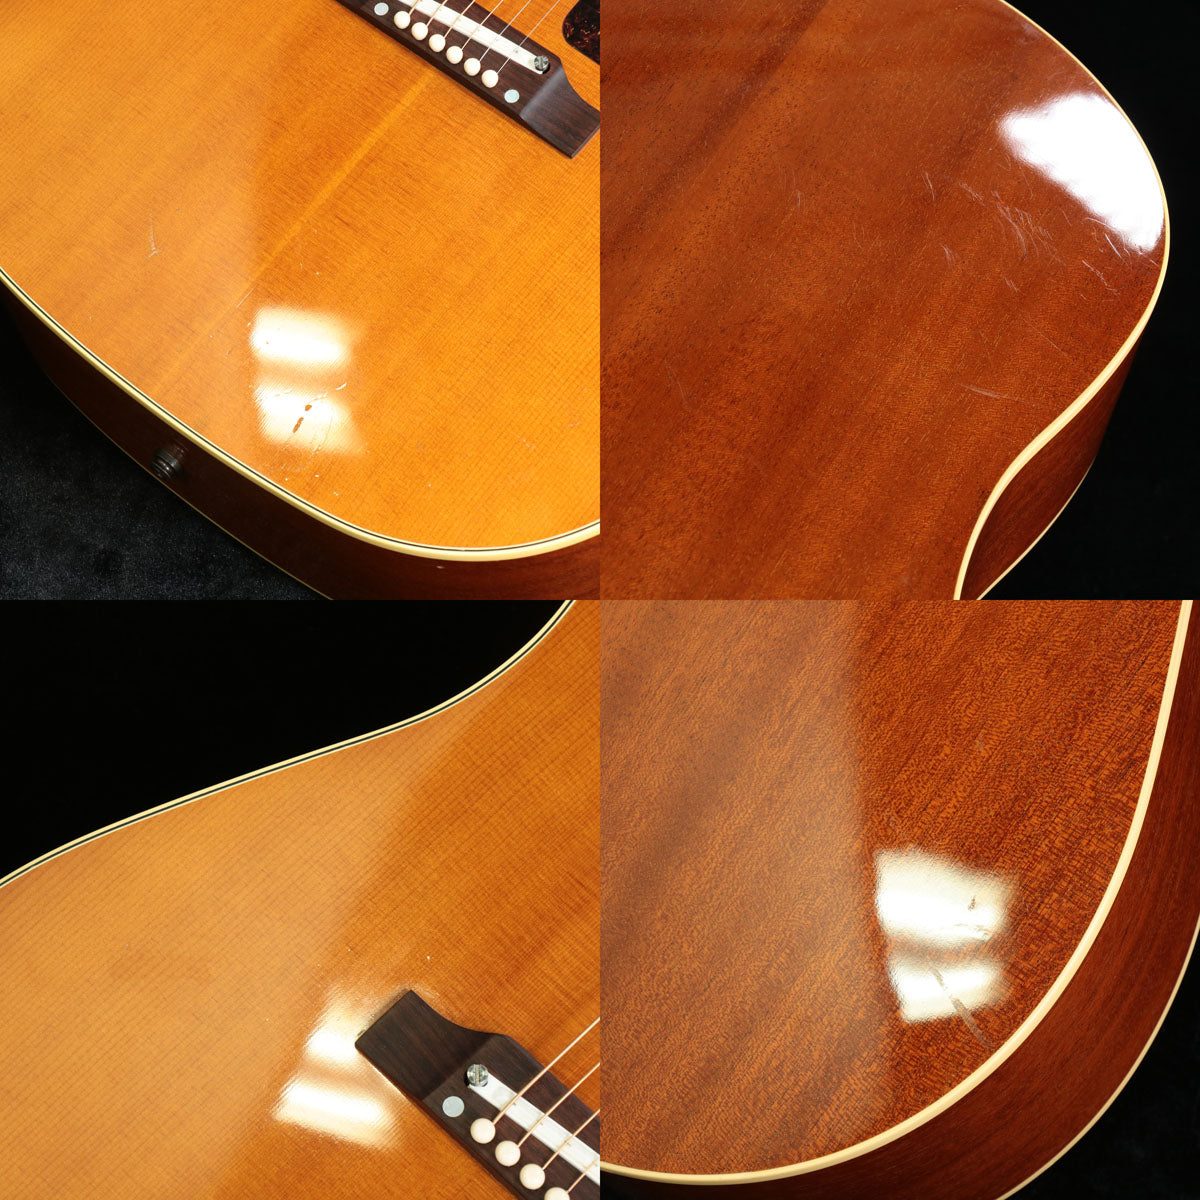 [SN T000731] USED Epiphone / FT-79N 1964 TEXAN Vintage Amber [with L.R.Baggs Lyric](Made in Japan / 2000) Epiphone [08]